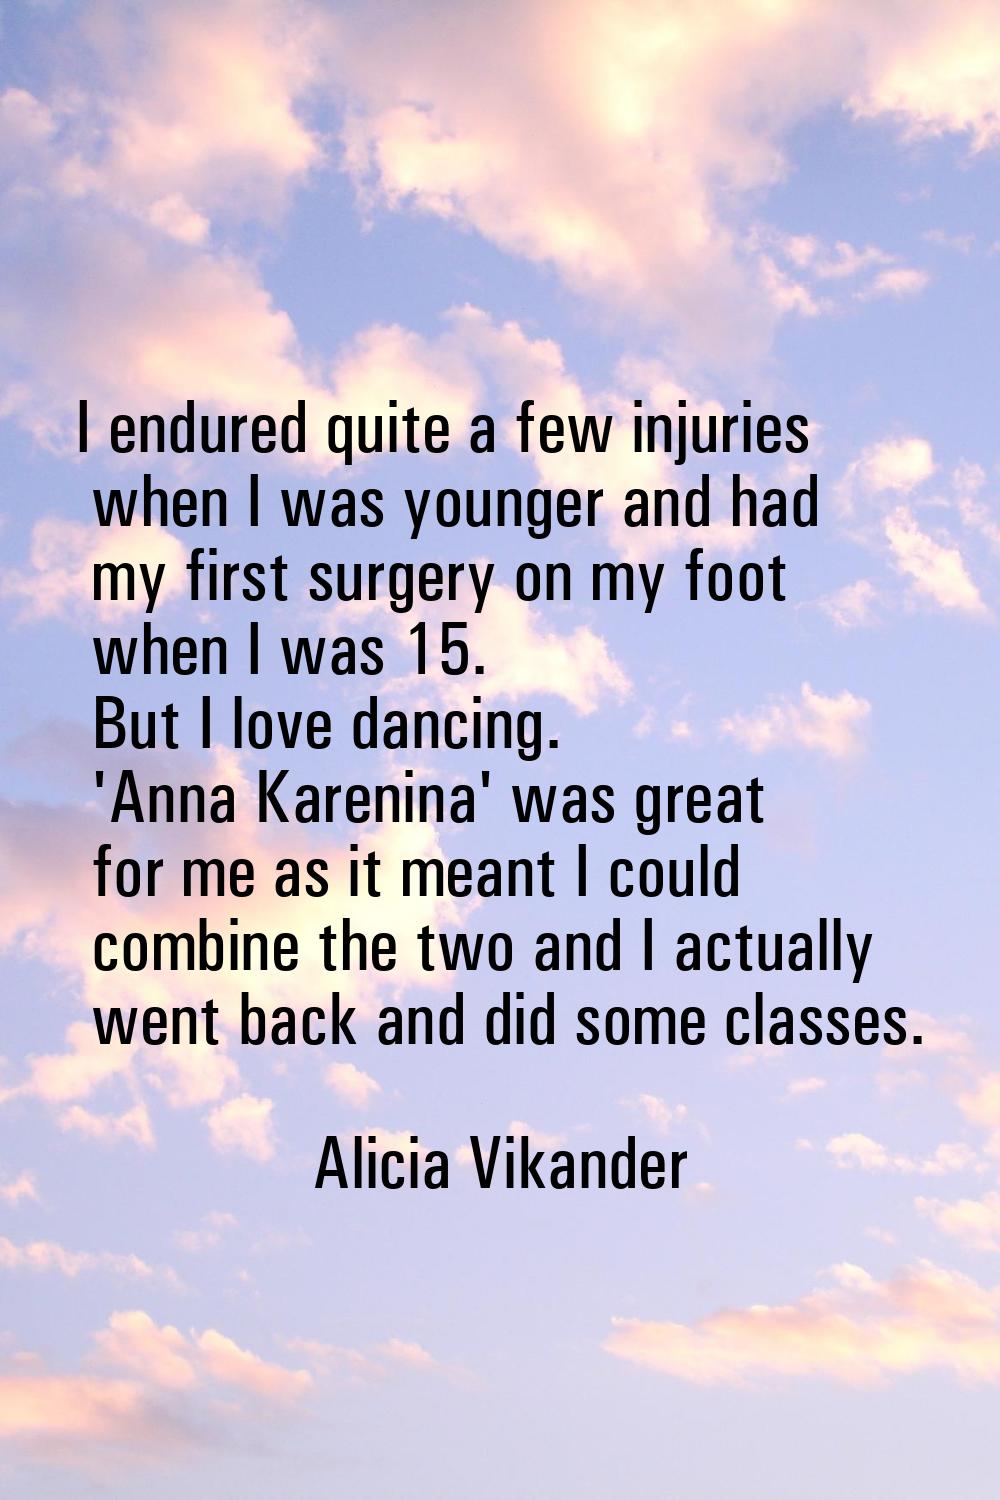 I endured quite a few injuries when I was younger and had my first surgery on my foot when I was 15